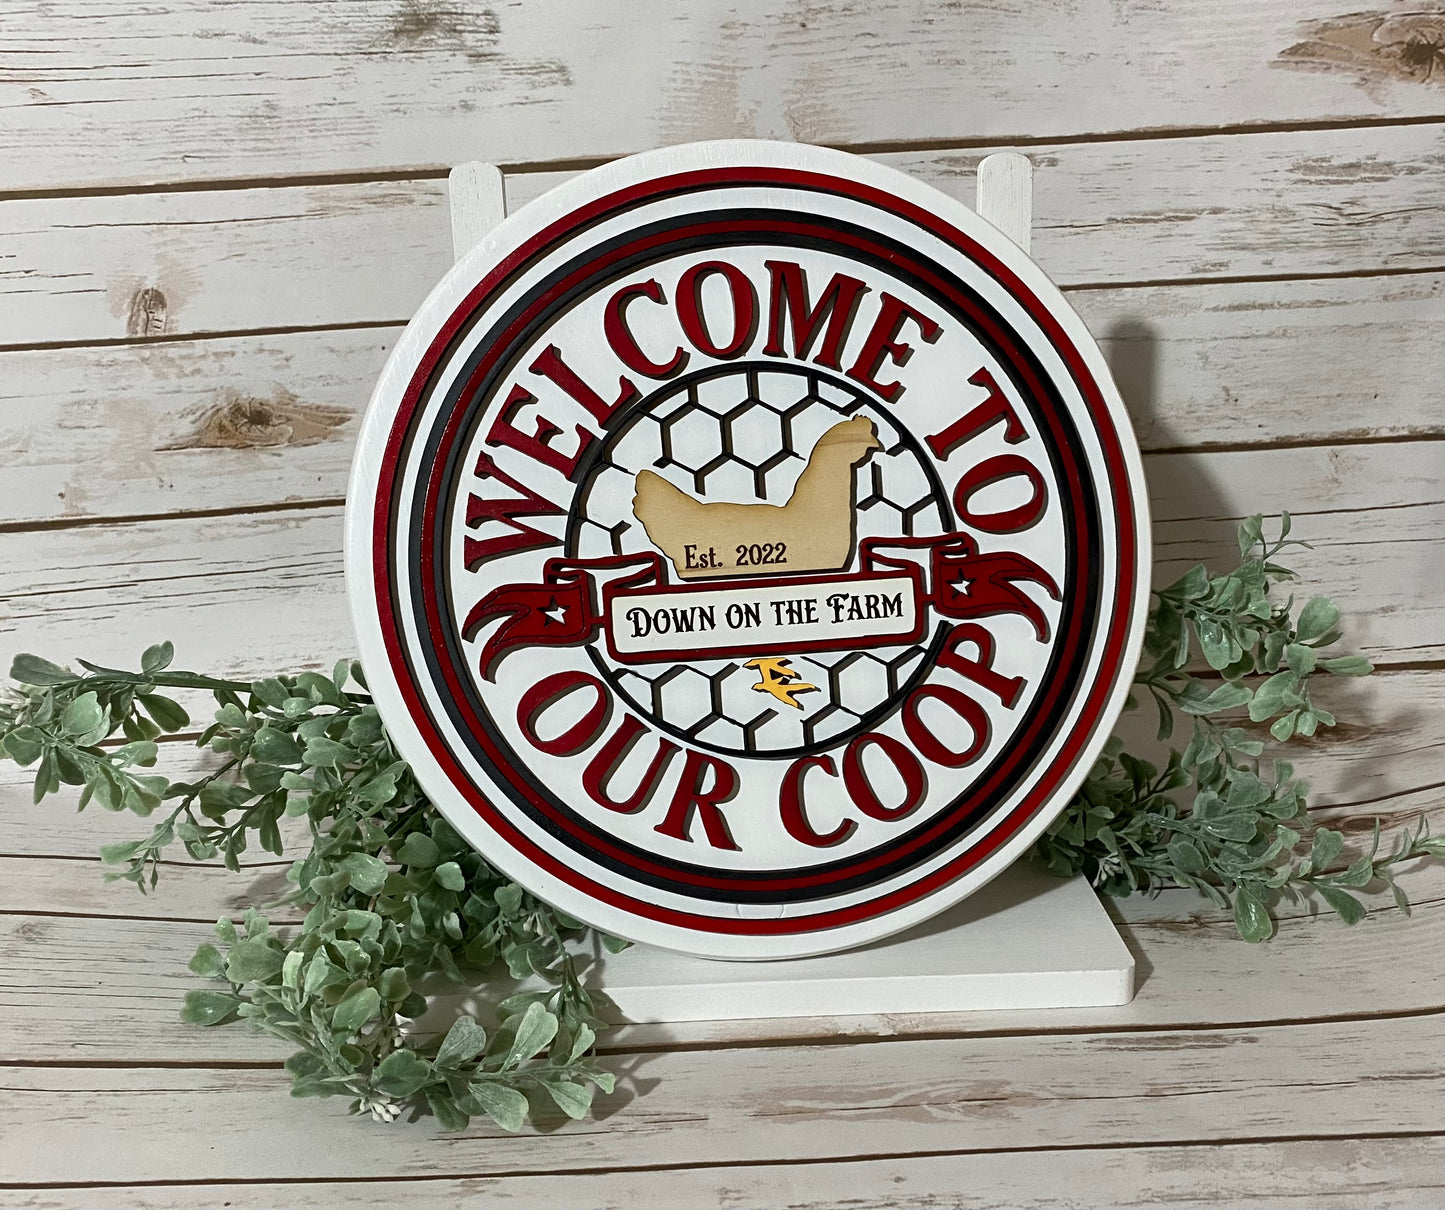 Personalized "Welcome to Our Coop" sign